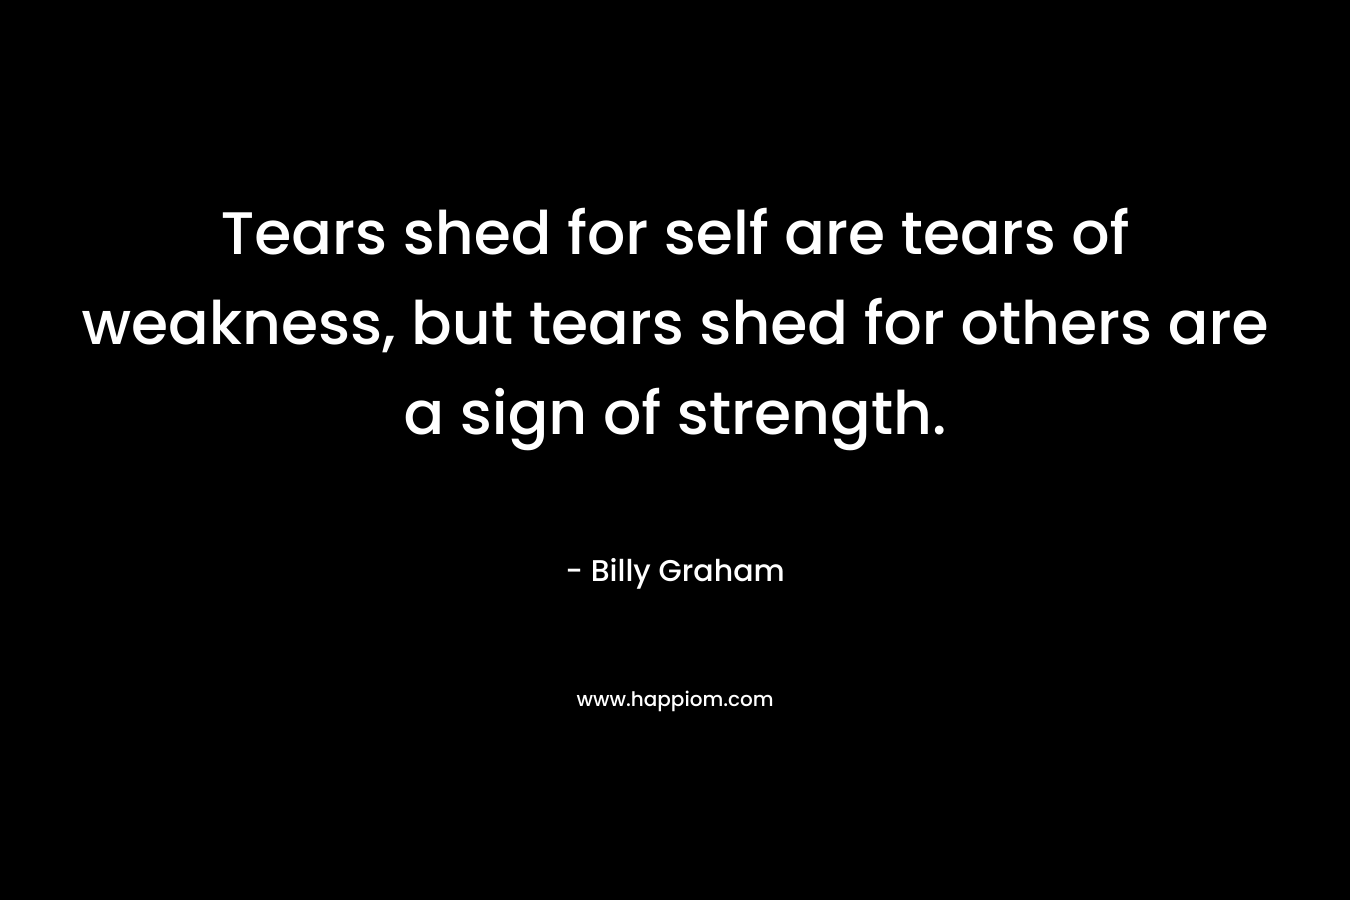 Tears shed for self are tears of weakness, but tears shed for others are a sign of strength.